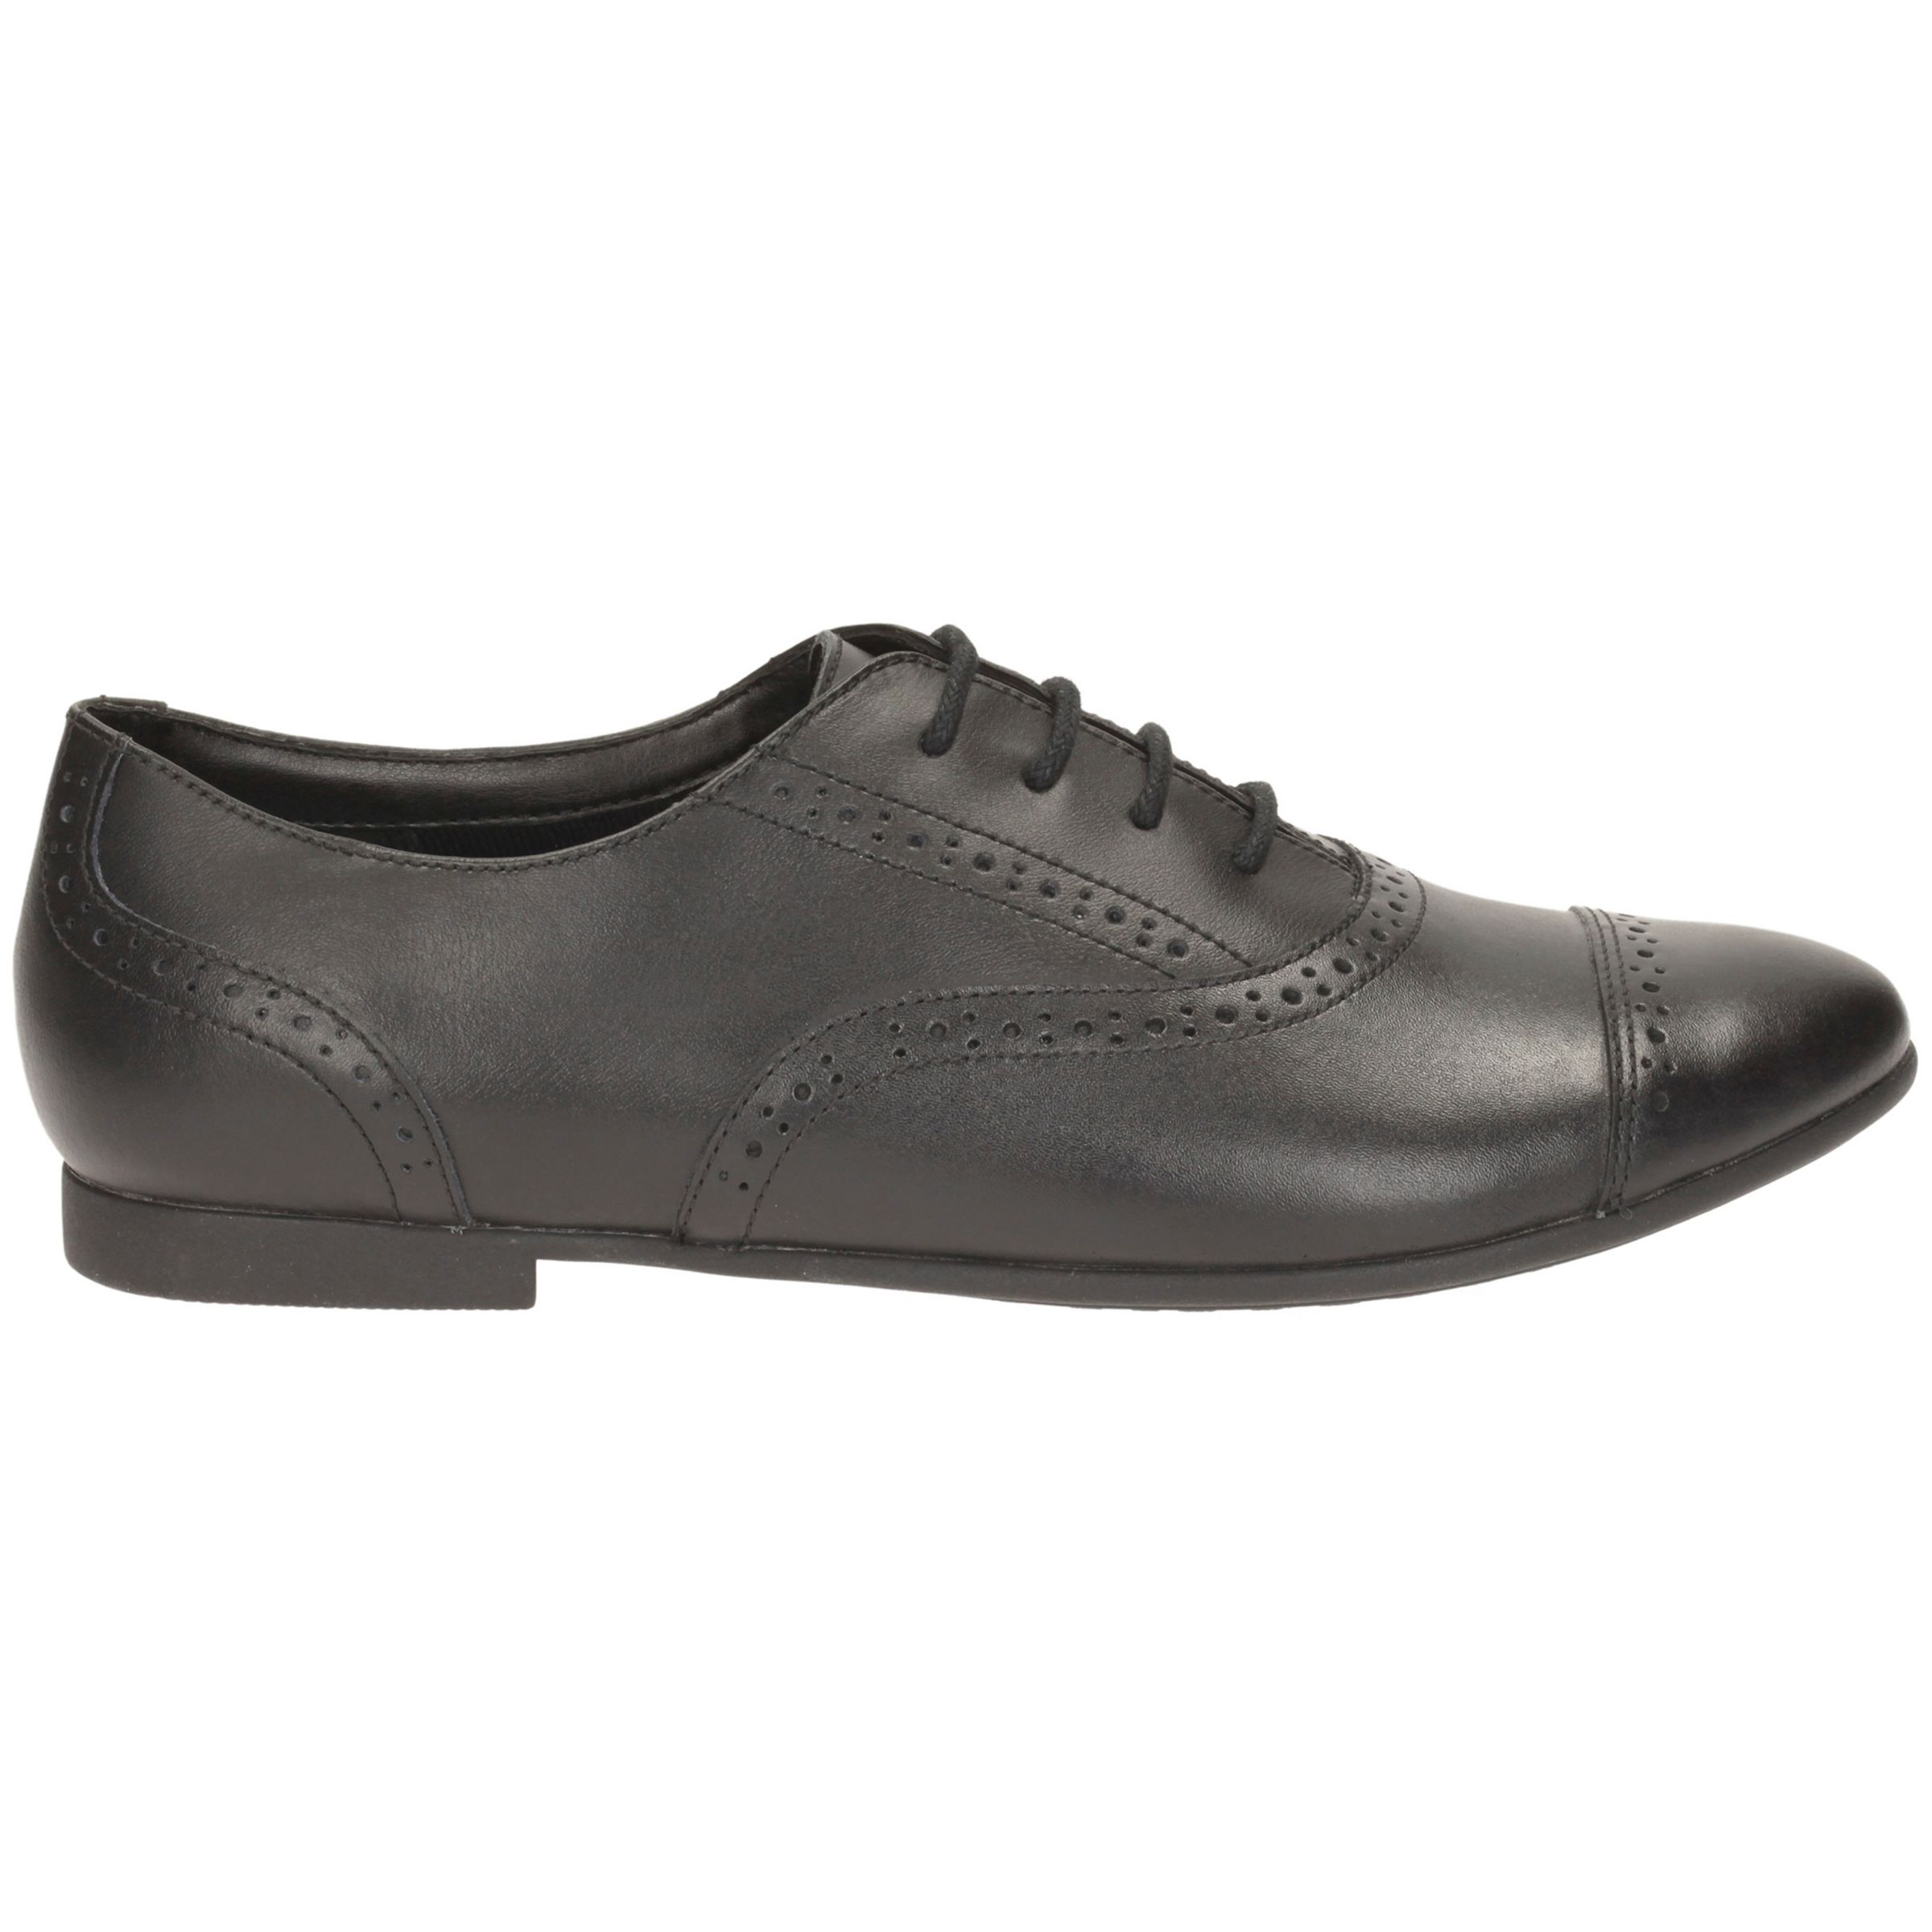 Clarks Children's Selsey Cool Leather Brogue School Shoes, Black